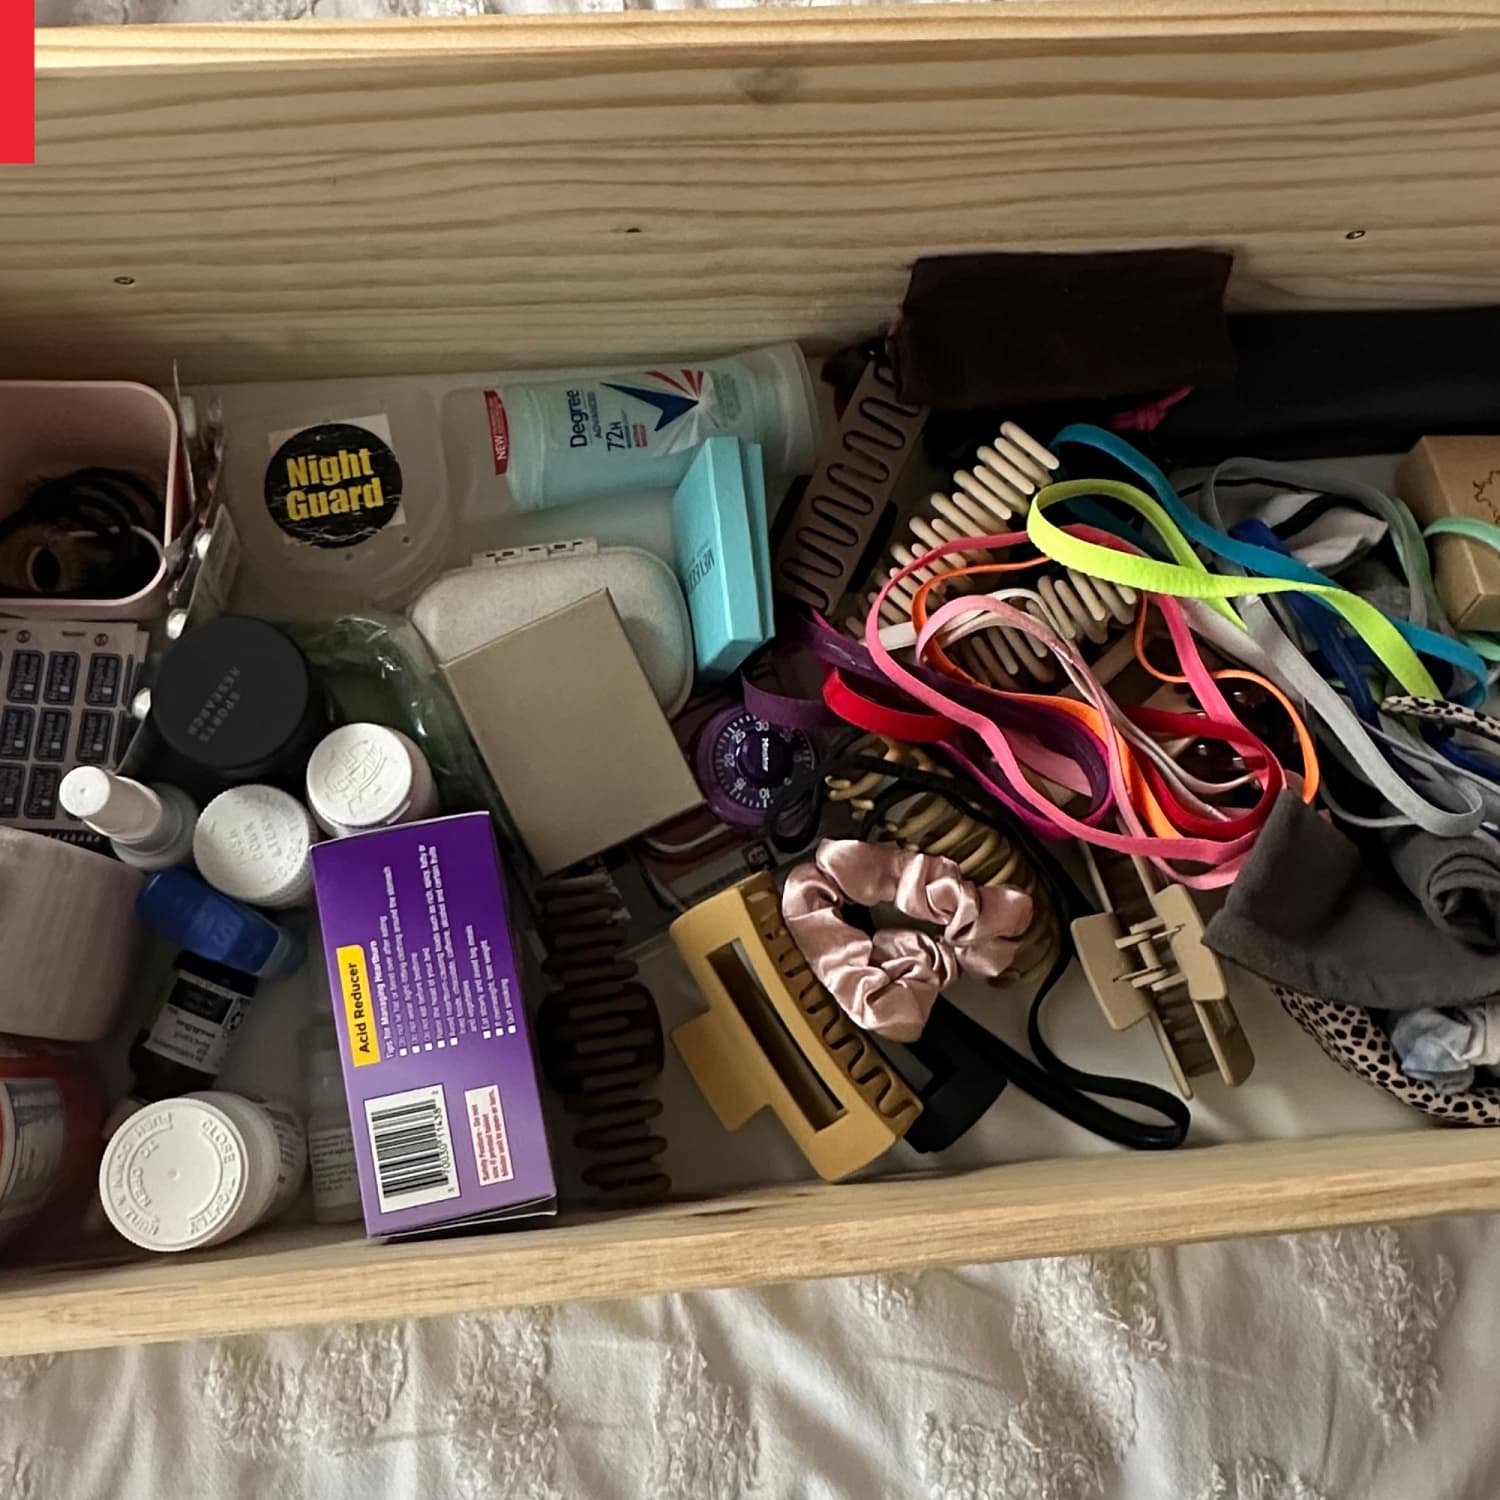 Found this 2-drawer organizer for less than $2 at Walmart. Works